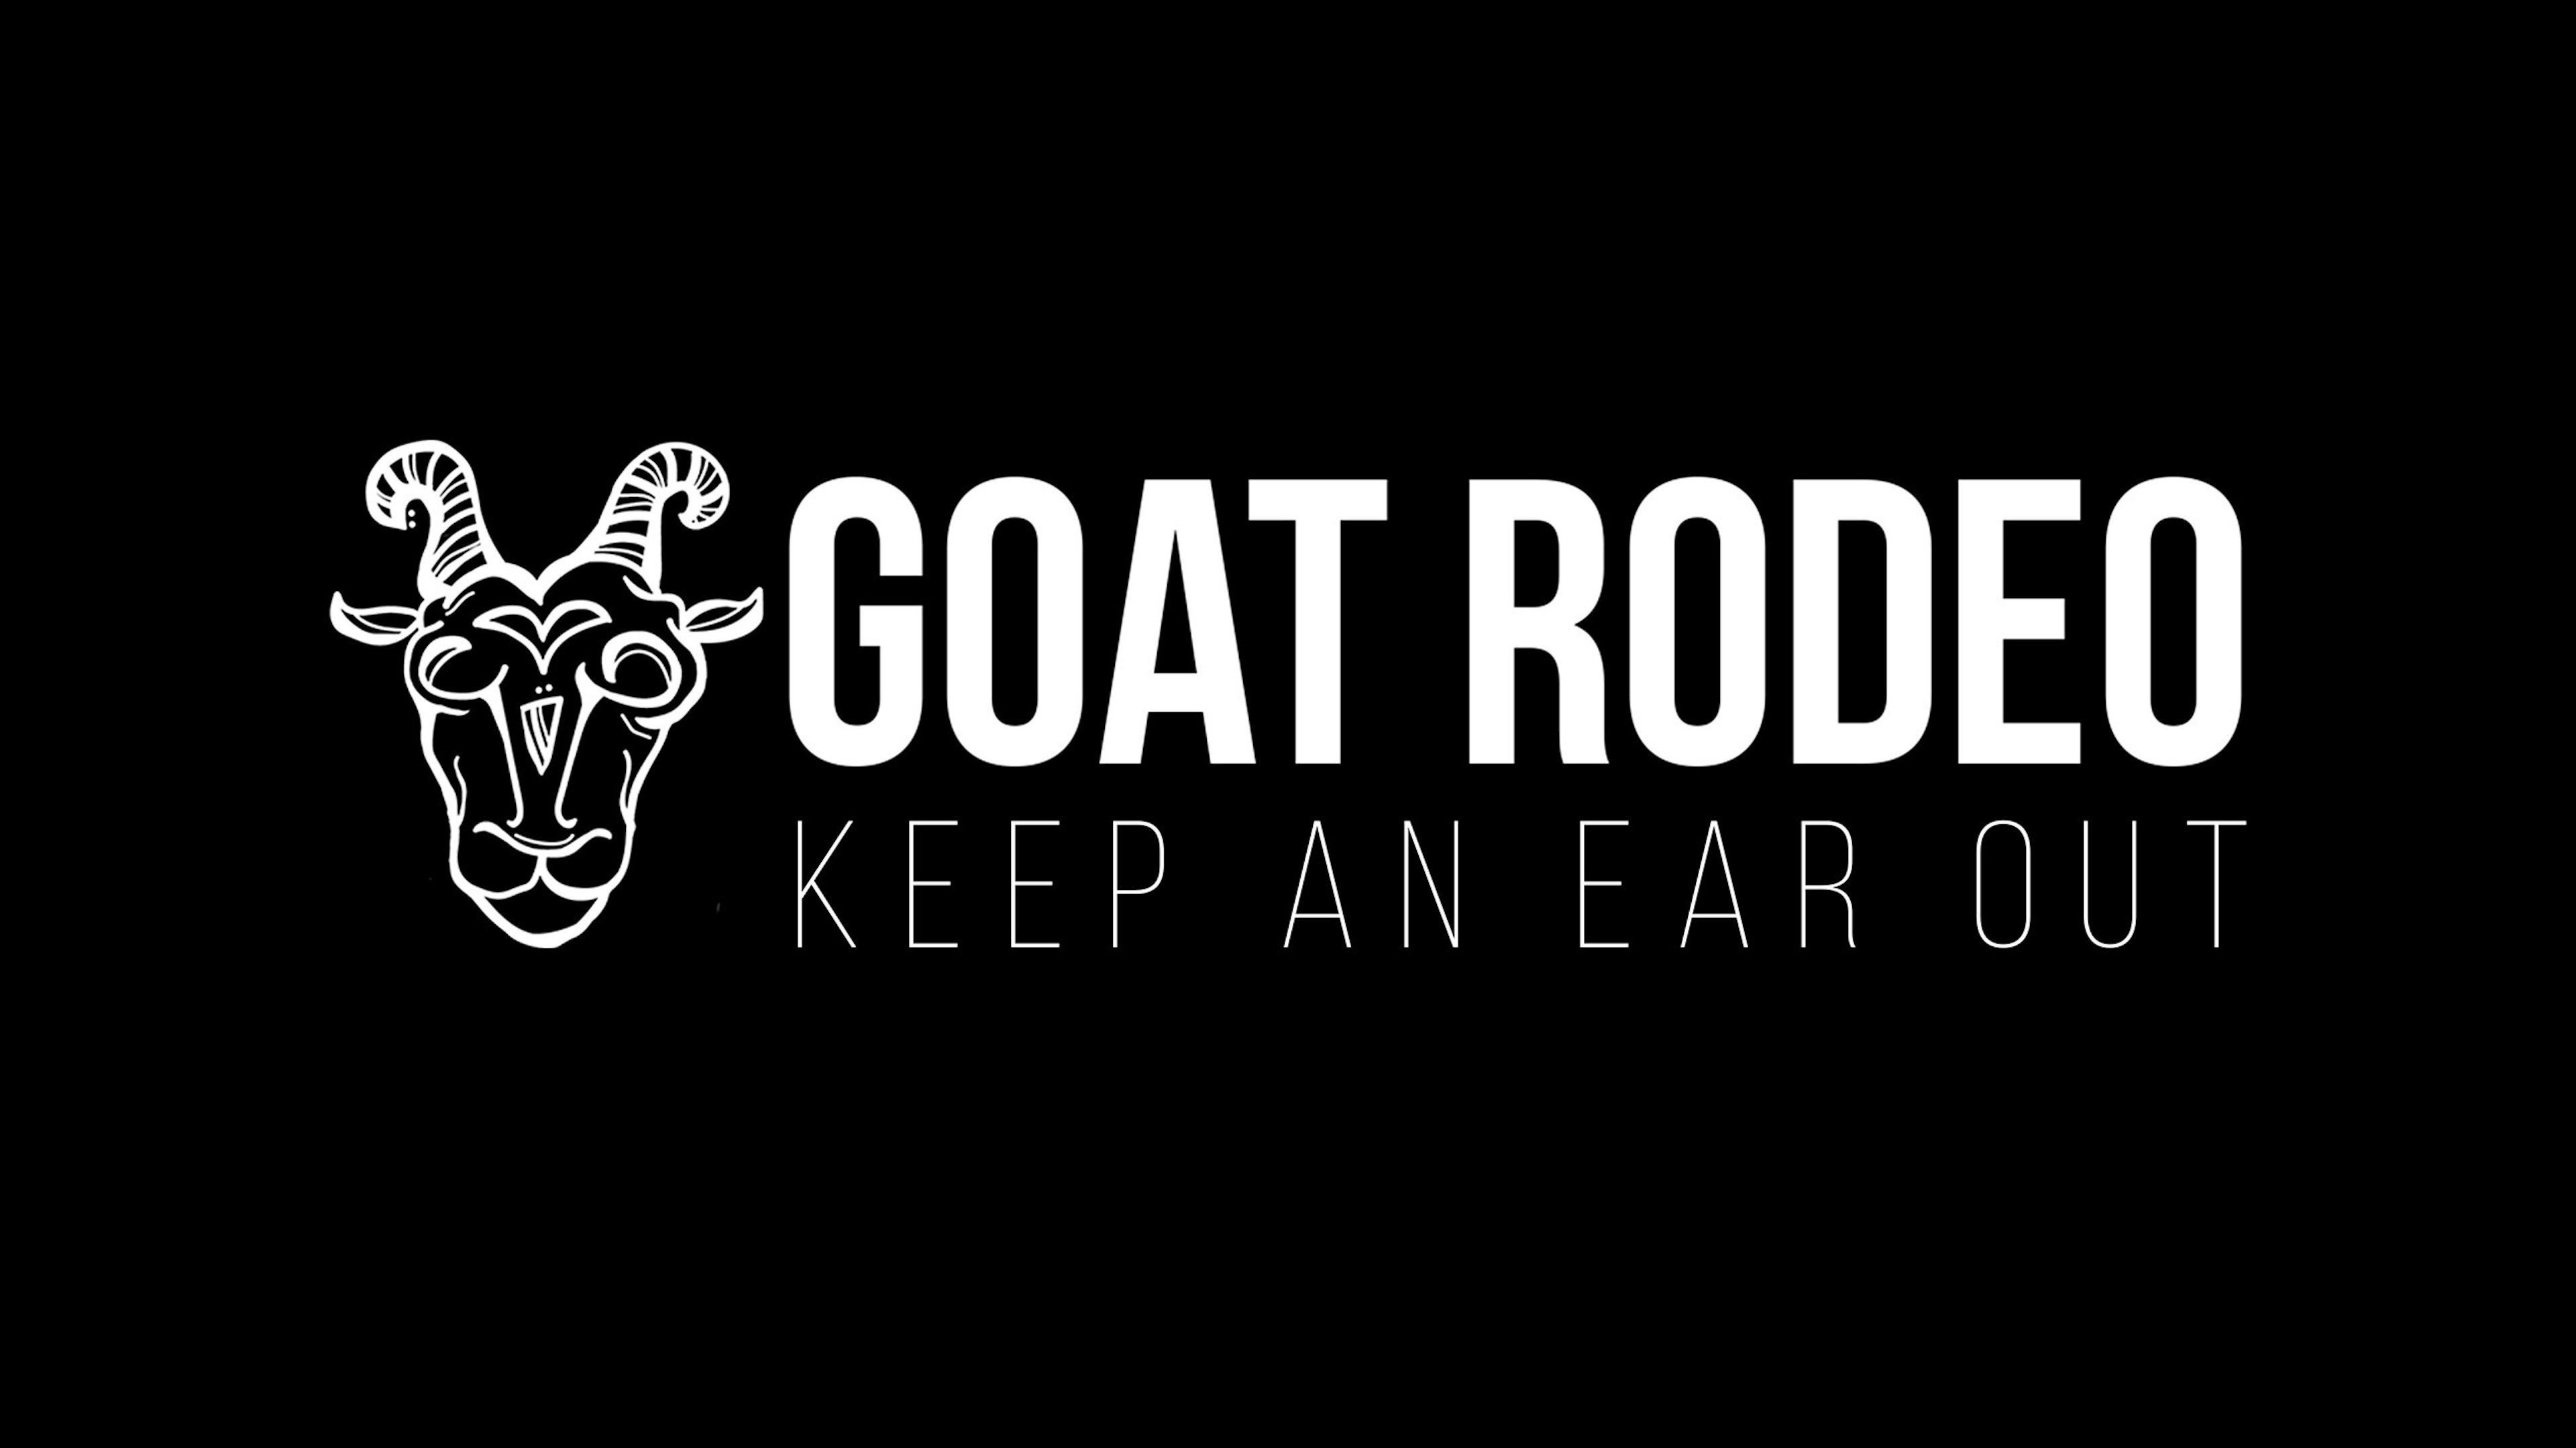 Black background with "Goat Rodeo Keep An Ear Out" written in white text with a white outlined goat drawing to the left of the text